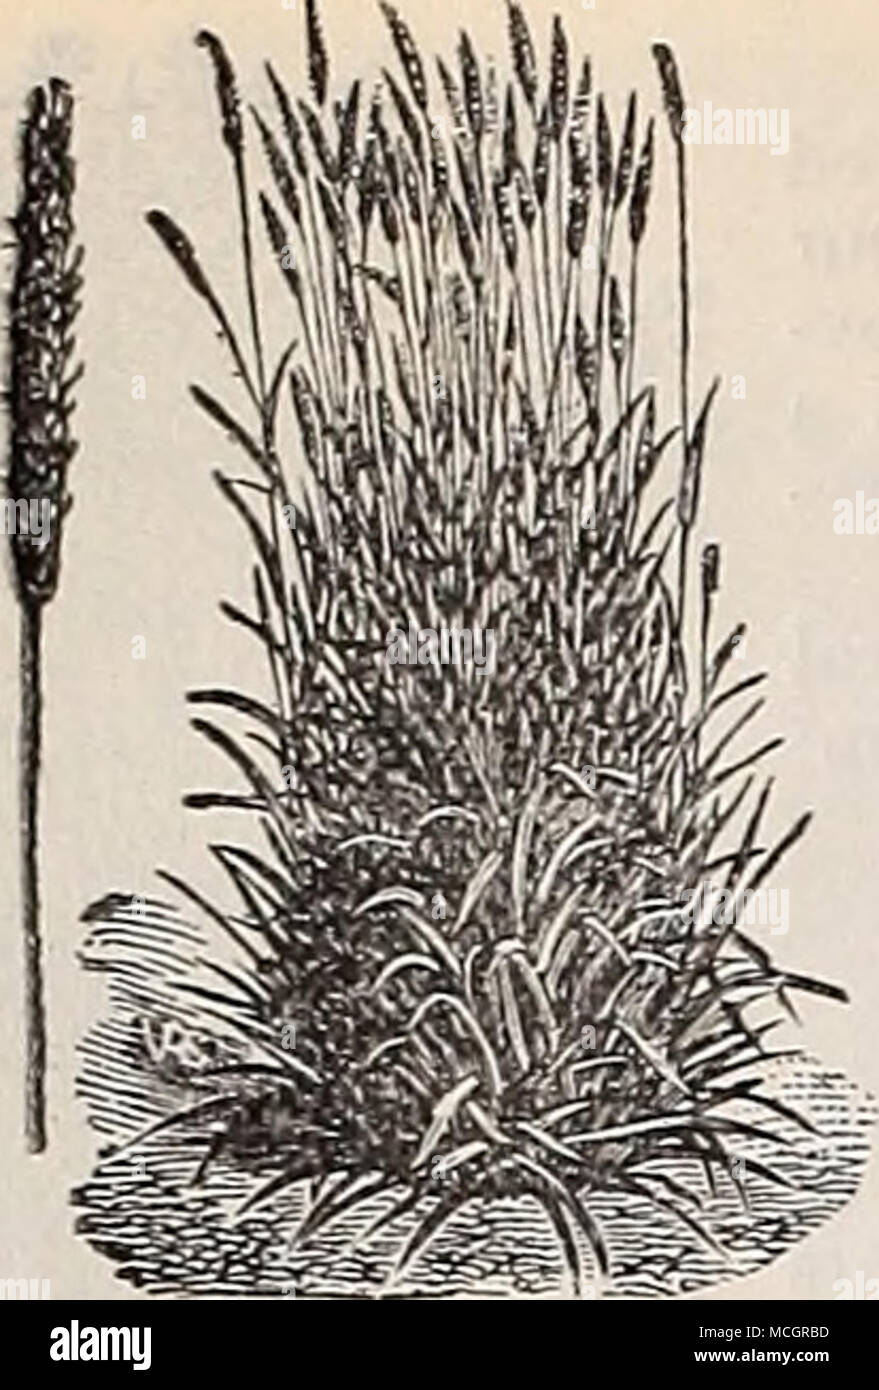 . Foxtail Grass. Sheep's Fescue [Festuca ovina). This grass forms a large part of the pasturage of the Eng- lish Downs. It produces a large quantity of short herbage, and should form a part of all mixtures for sheep pastures. 40 lbs. to the acre. Lb. 20 cts.; 100 lbs. S16.00. Fall Meadow Oat Grass (Avena elatior). A valuable grass for soiling or permanent pas- ture ; of early and luxuriant growth. 50 lbs. to the acre. Lb. 20 cts ; 100 lbs. 618.00. Timothy (Phleumprotease). The most important agricultural grass for the Middle States, thriving best upon rich soils. Not suited to permanent pastur Stock Photo